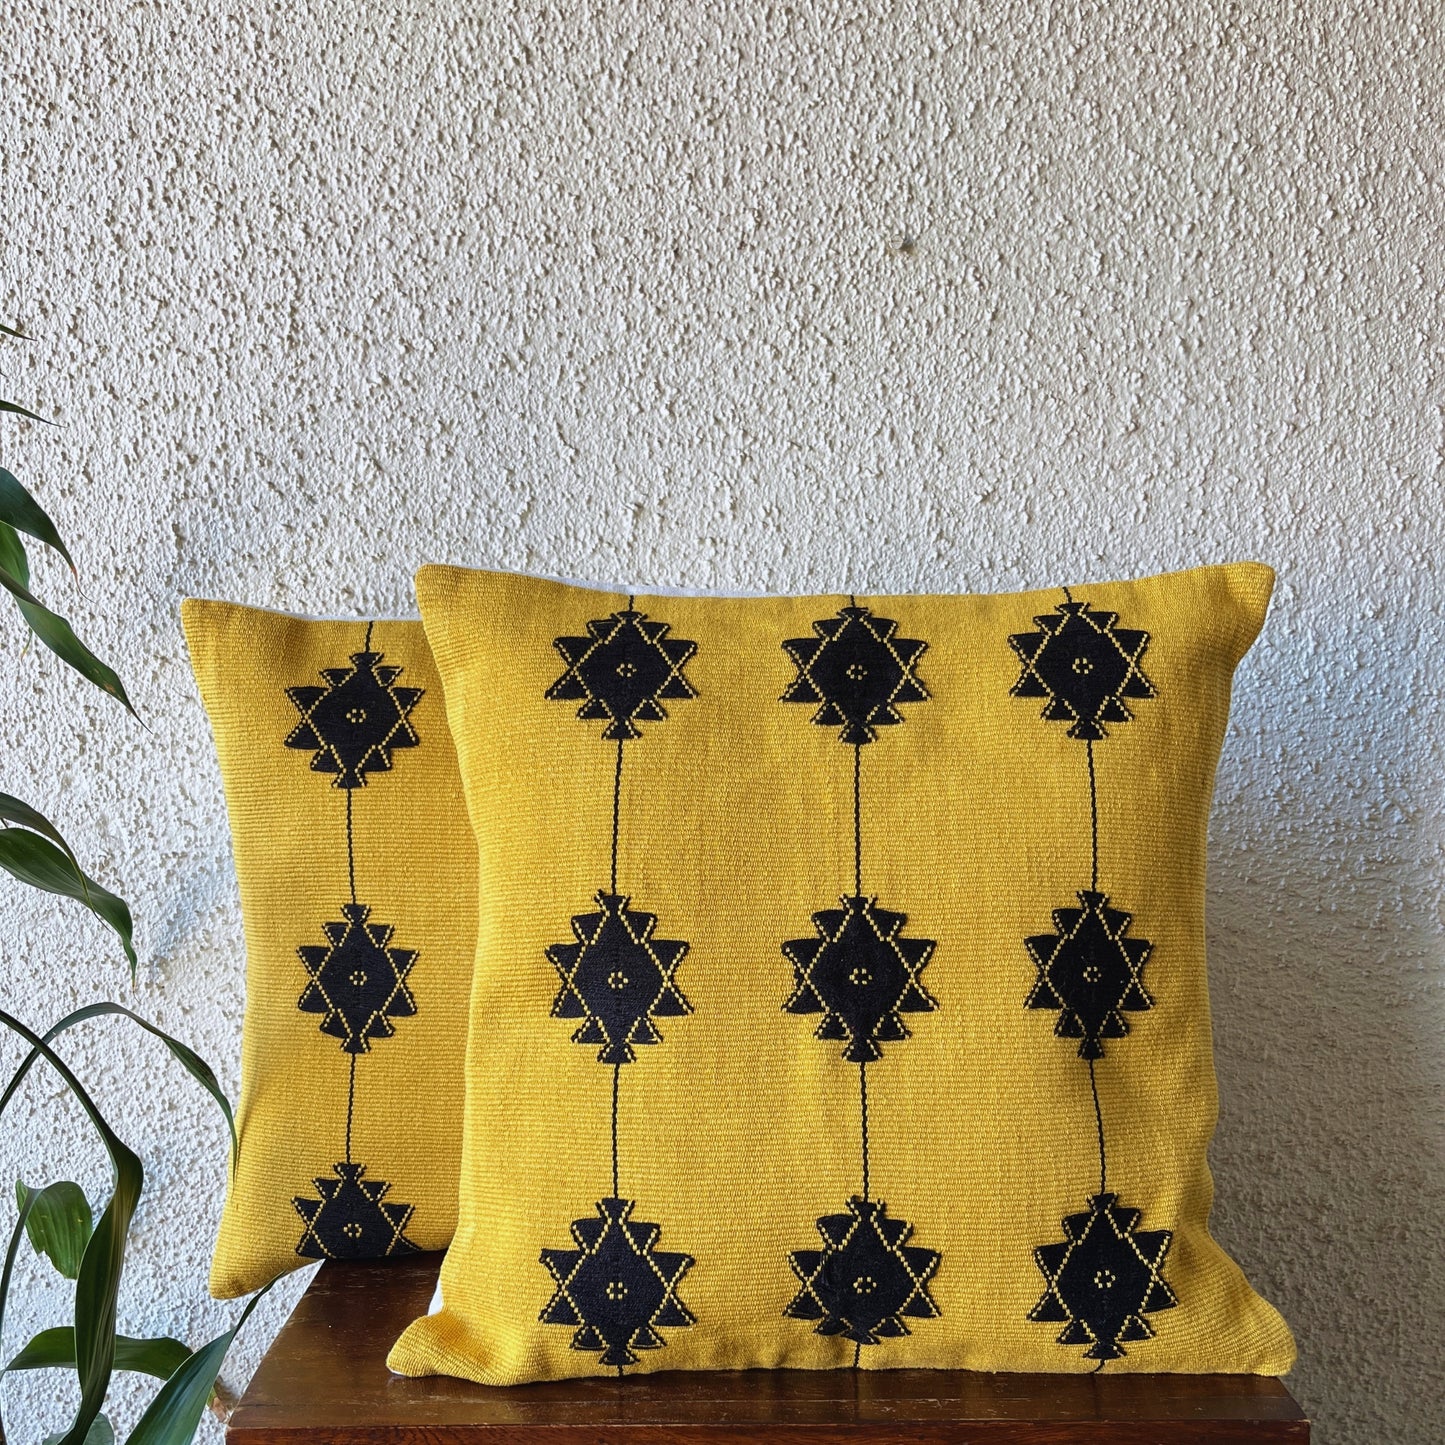 Chizami Weaves - Loin Loom Handwoven Cushion Cover Set in Mustard Yellow (Set of 2)